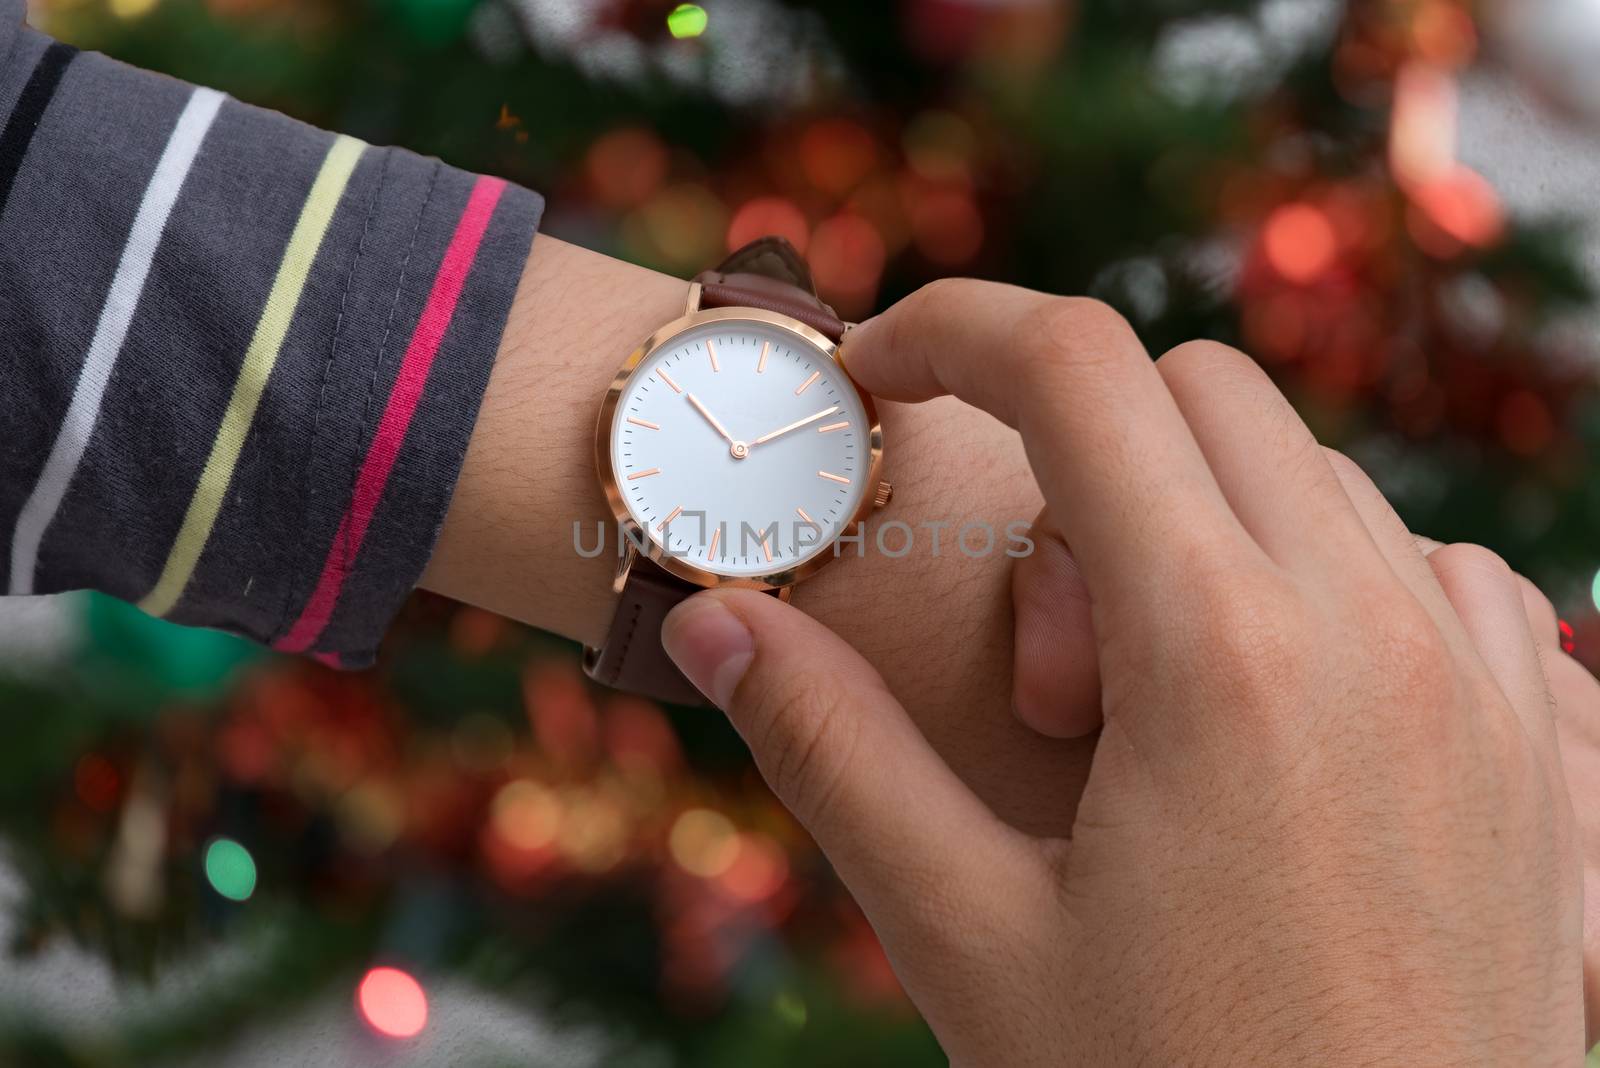 Wrist watch on girl's hand in christmas time in front of a Christmas tree in background